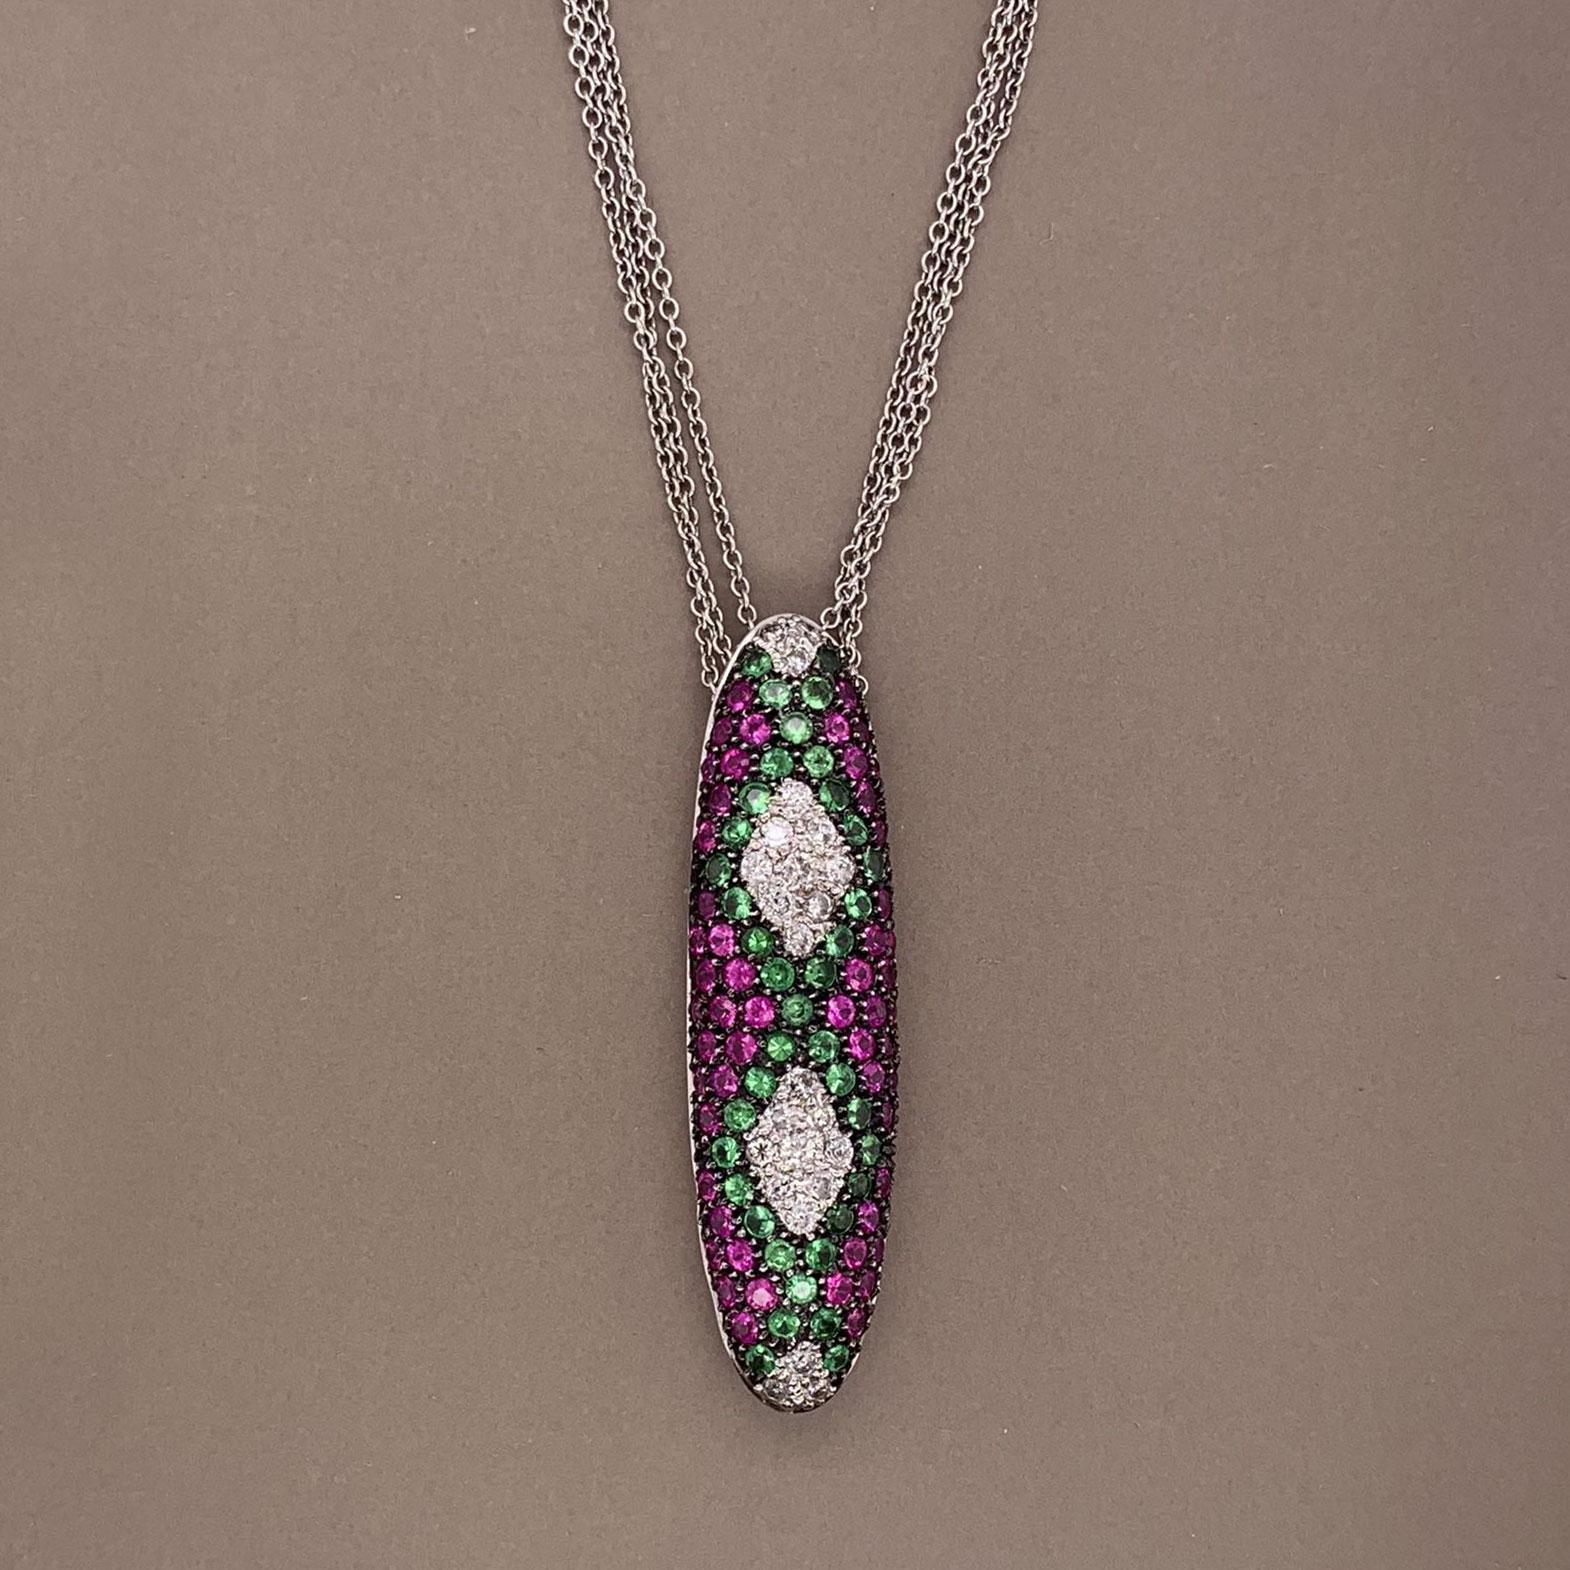 This stylish necklace features diamonds rubies and tsavorite set in a mosaic pattern. The diamonds weigh a total of 0.60 carats, the rubies 1.50 carats and the tsavorite 1.30 carats. They are all set in 18k white gold with black rhodium finish on